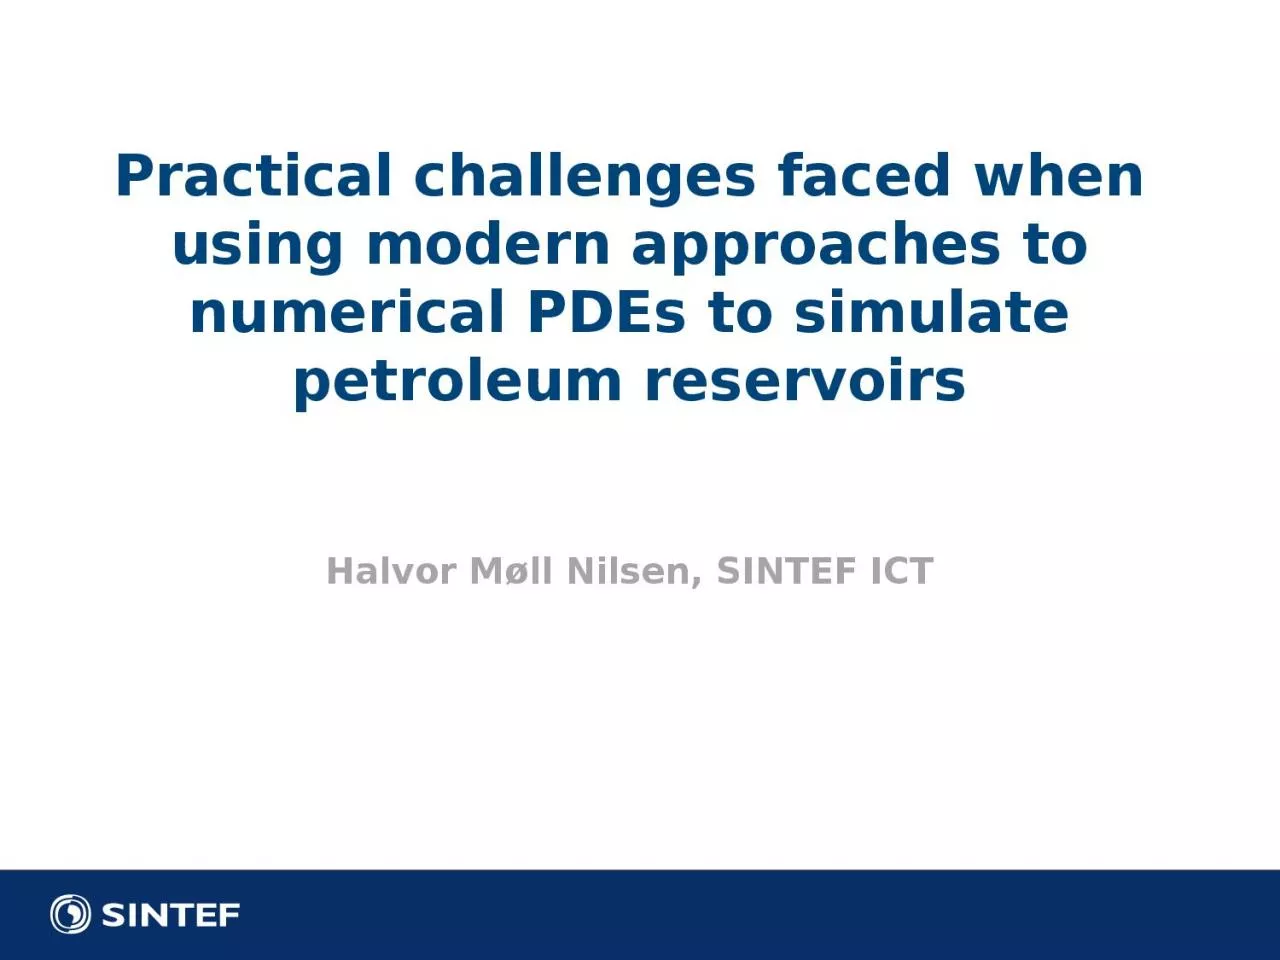 Practical challenges faced when using modern approaches to numerical PDEs to simulate